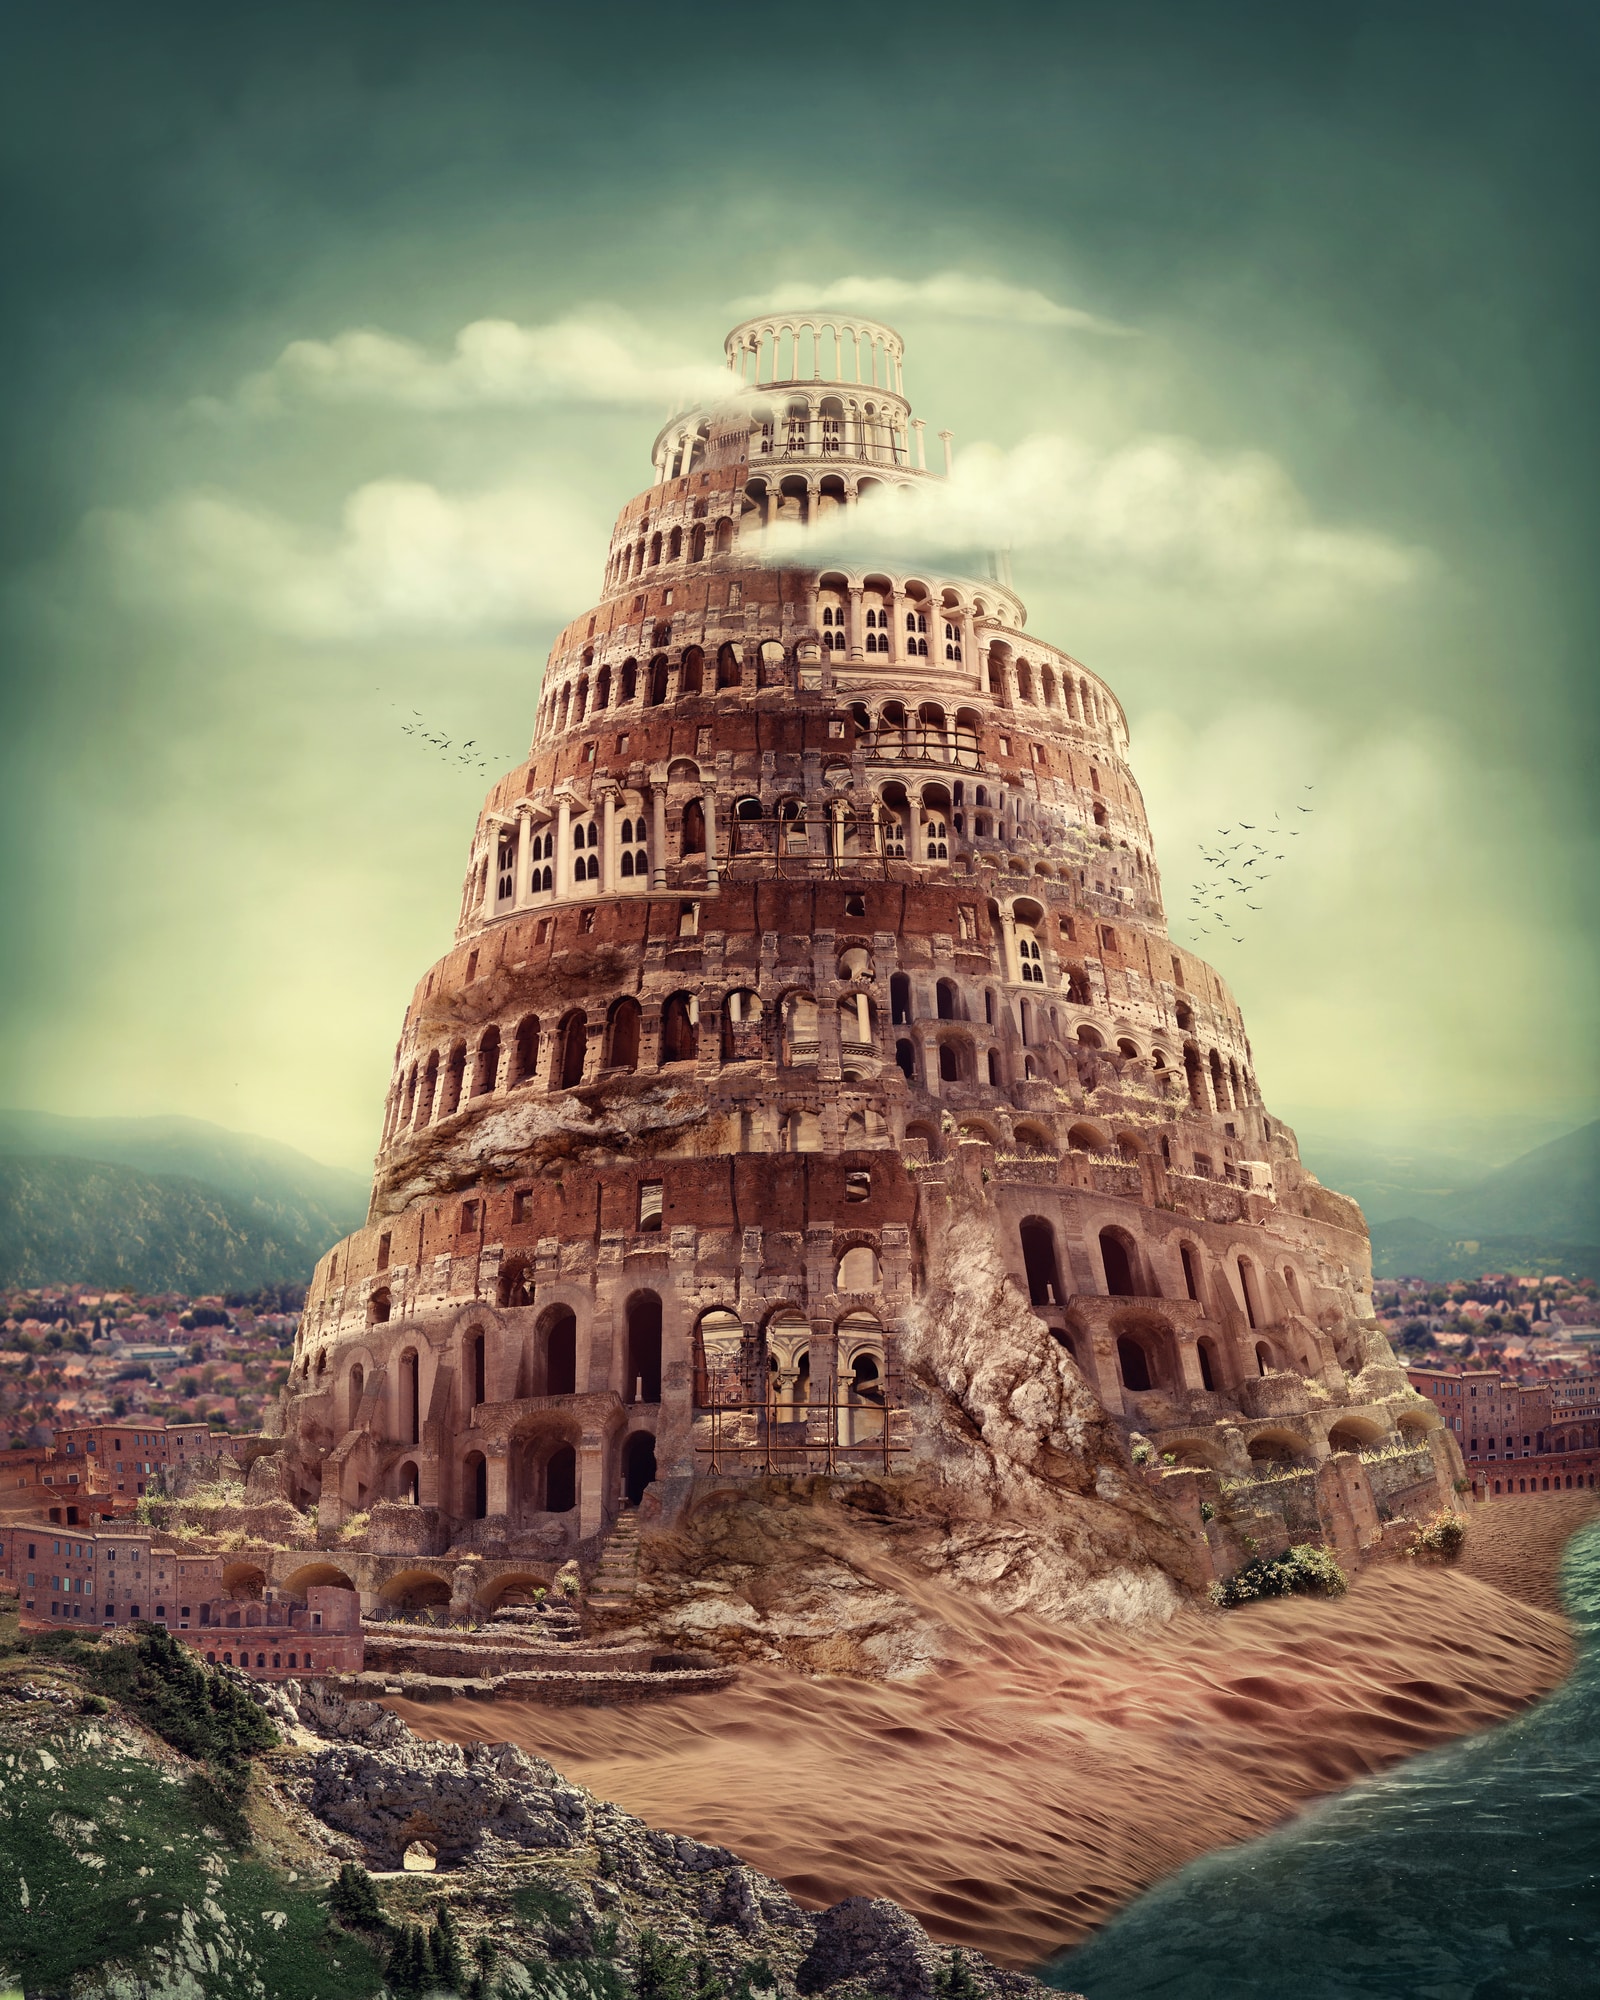 Tower of Babel - in Genesis God separated the nations, but Satan tries to blur lines